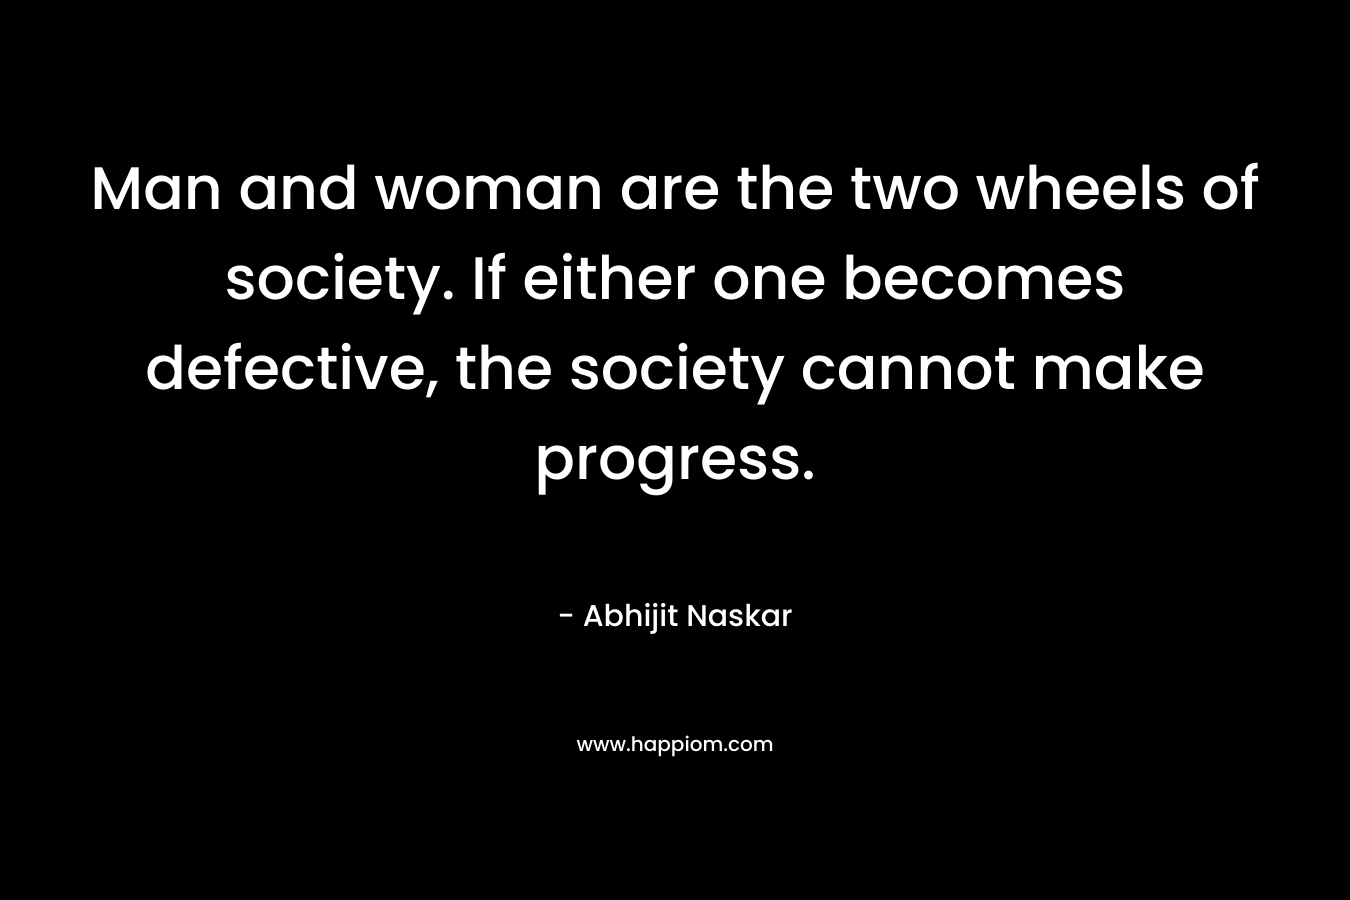 Man and woman are the two wheels of society. If either one becomes defective, the society cannot make progress.